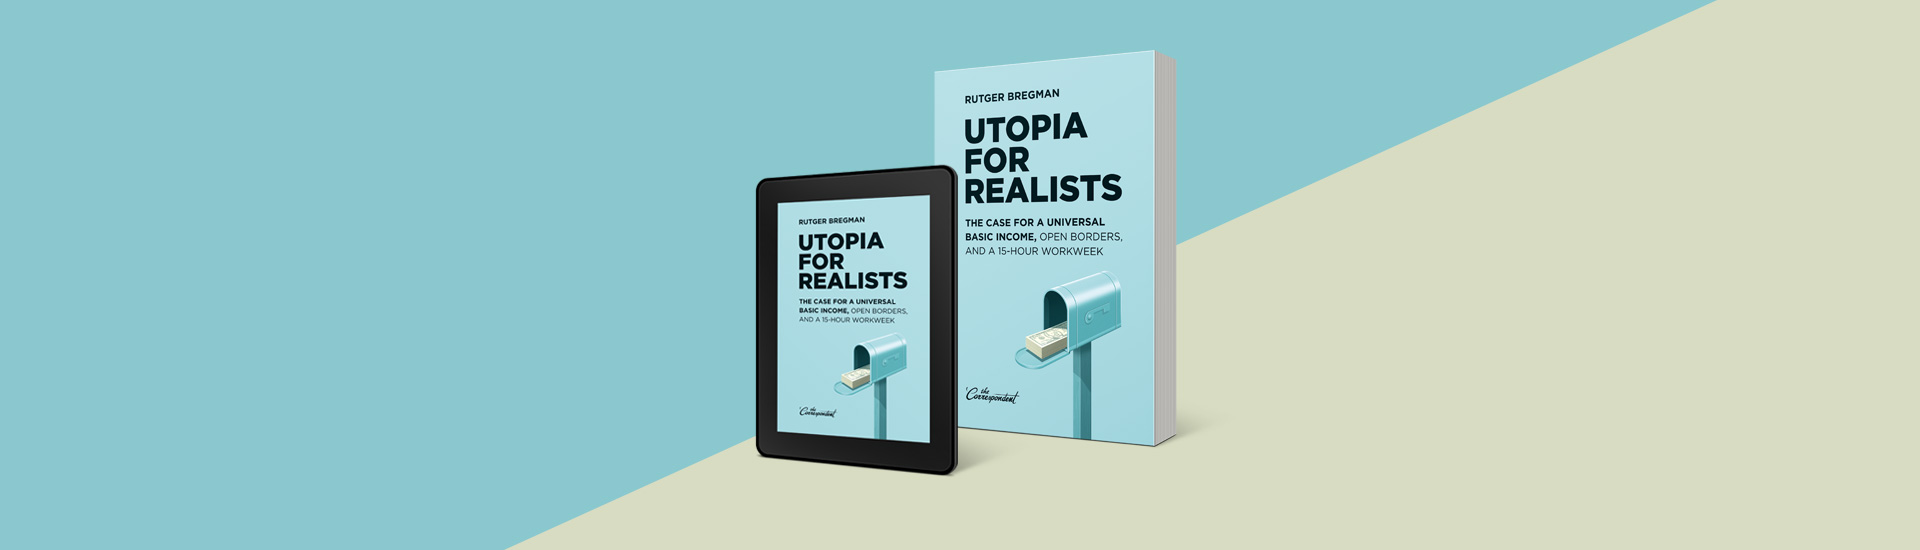 Utopia for Realists by Rutger Bregman